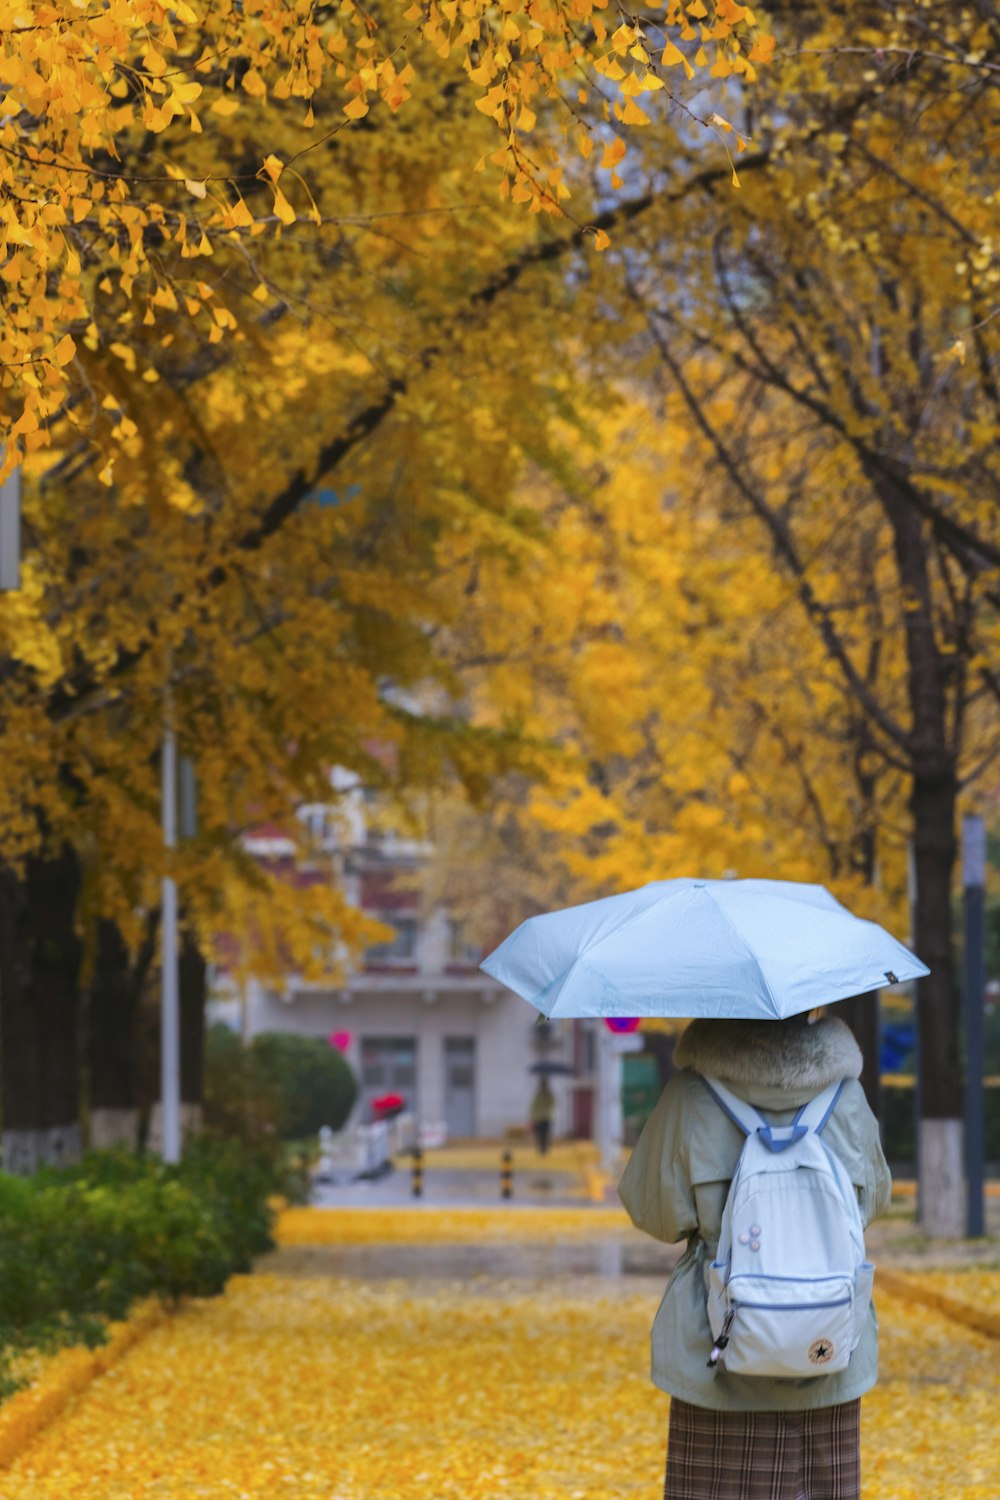 woman in white jacket holding umbrella standing near yellow leaf trees during daytime